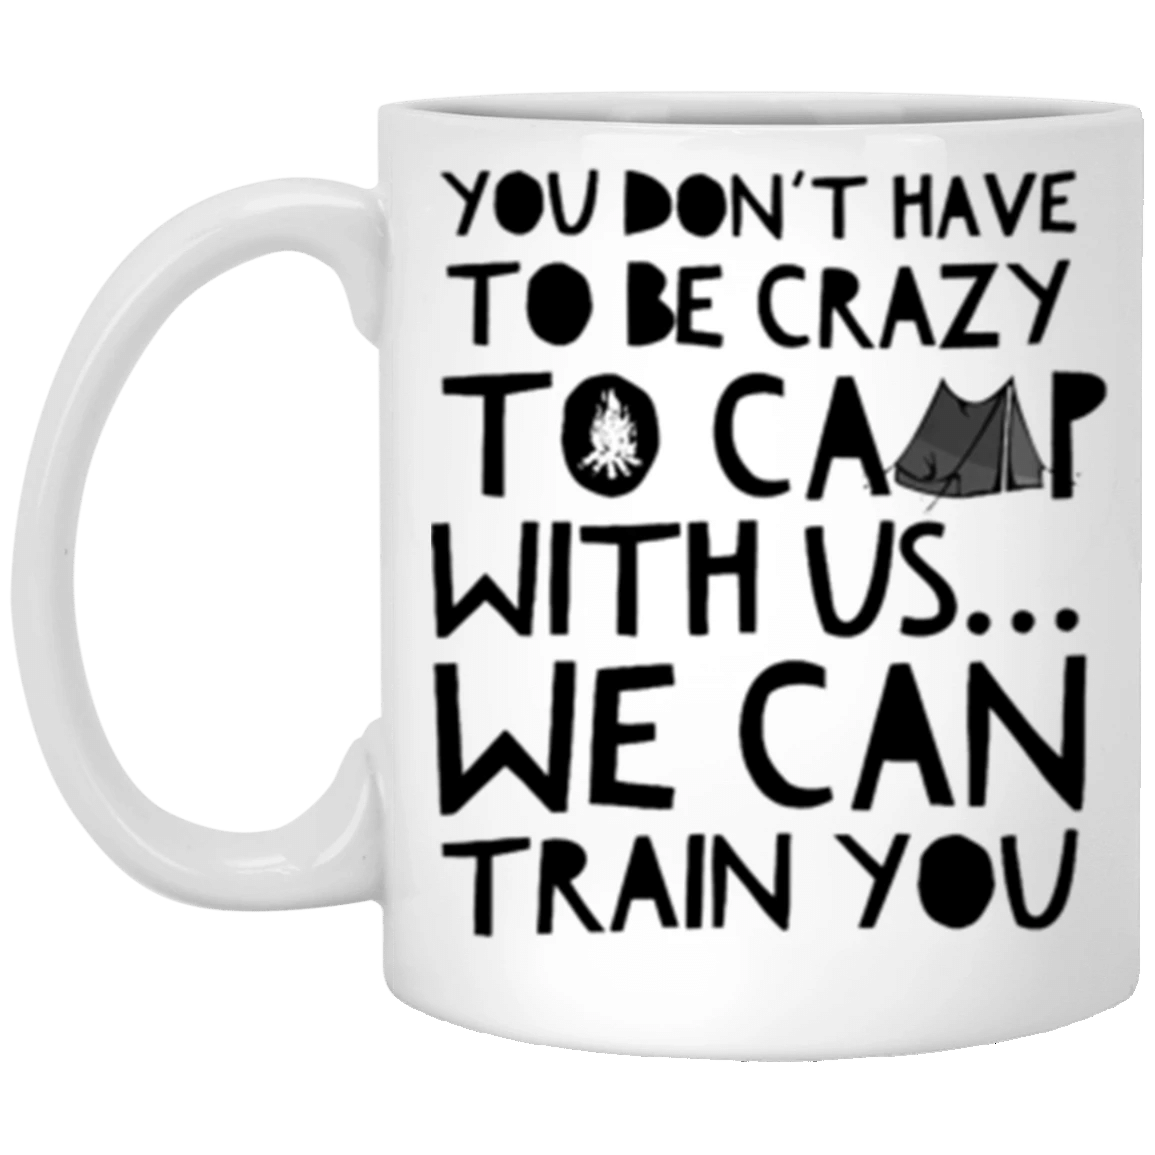 Camping Coffee Mug You Don't Have To Be Crazy To Camp With Us We Can Train You Funny Saying Gift